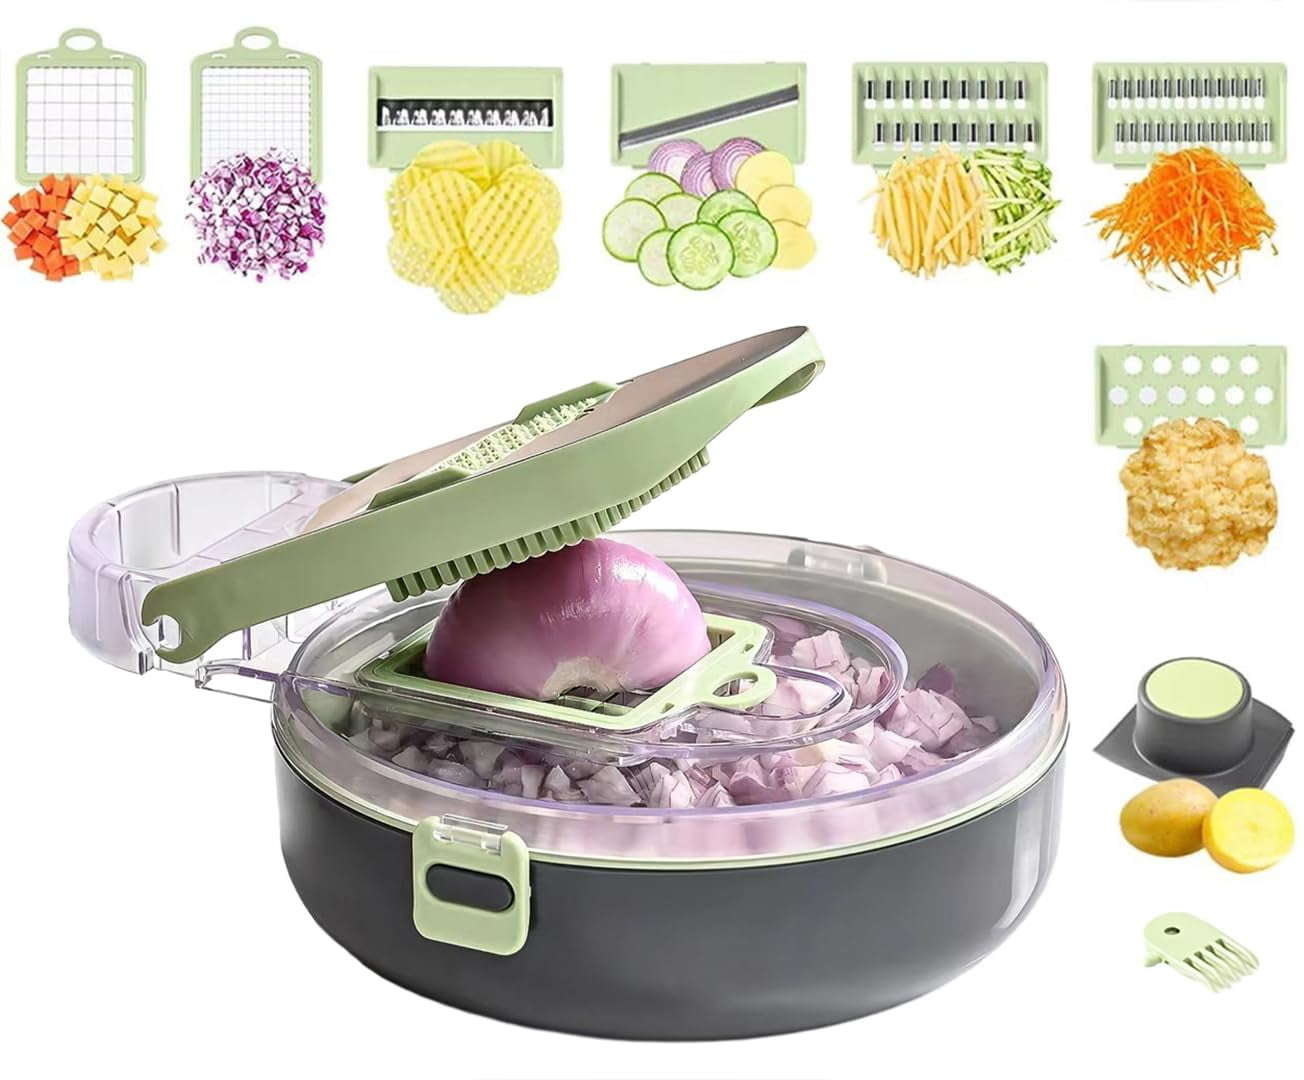 Mueller Austria Pro-series 8 In 1 Multi-use Slicer And Dicer - Gray : Target